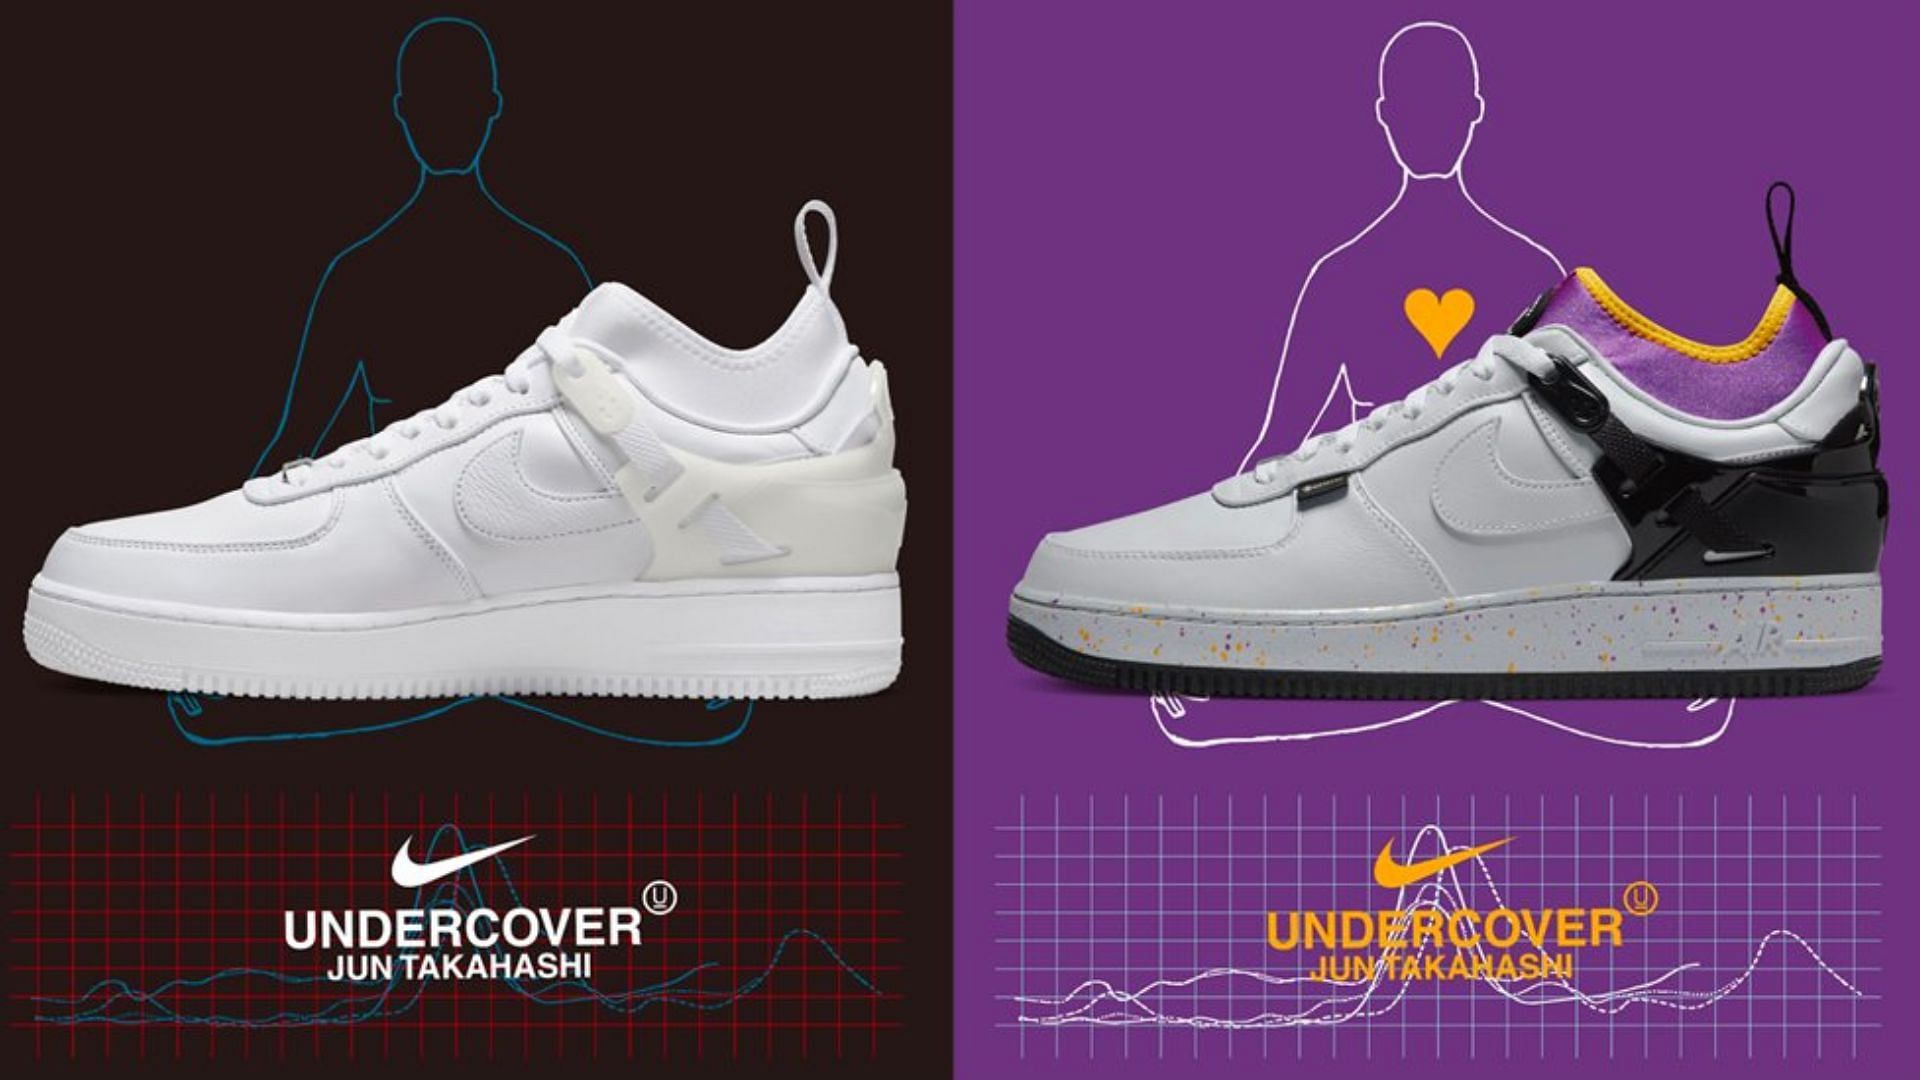 UNDERCOVER x Nike Air Force 1 Low footwear collection (Image via UNDERCOVER)